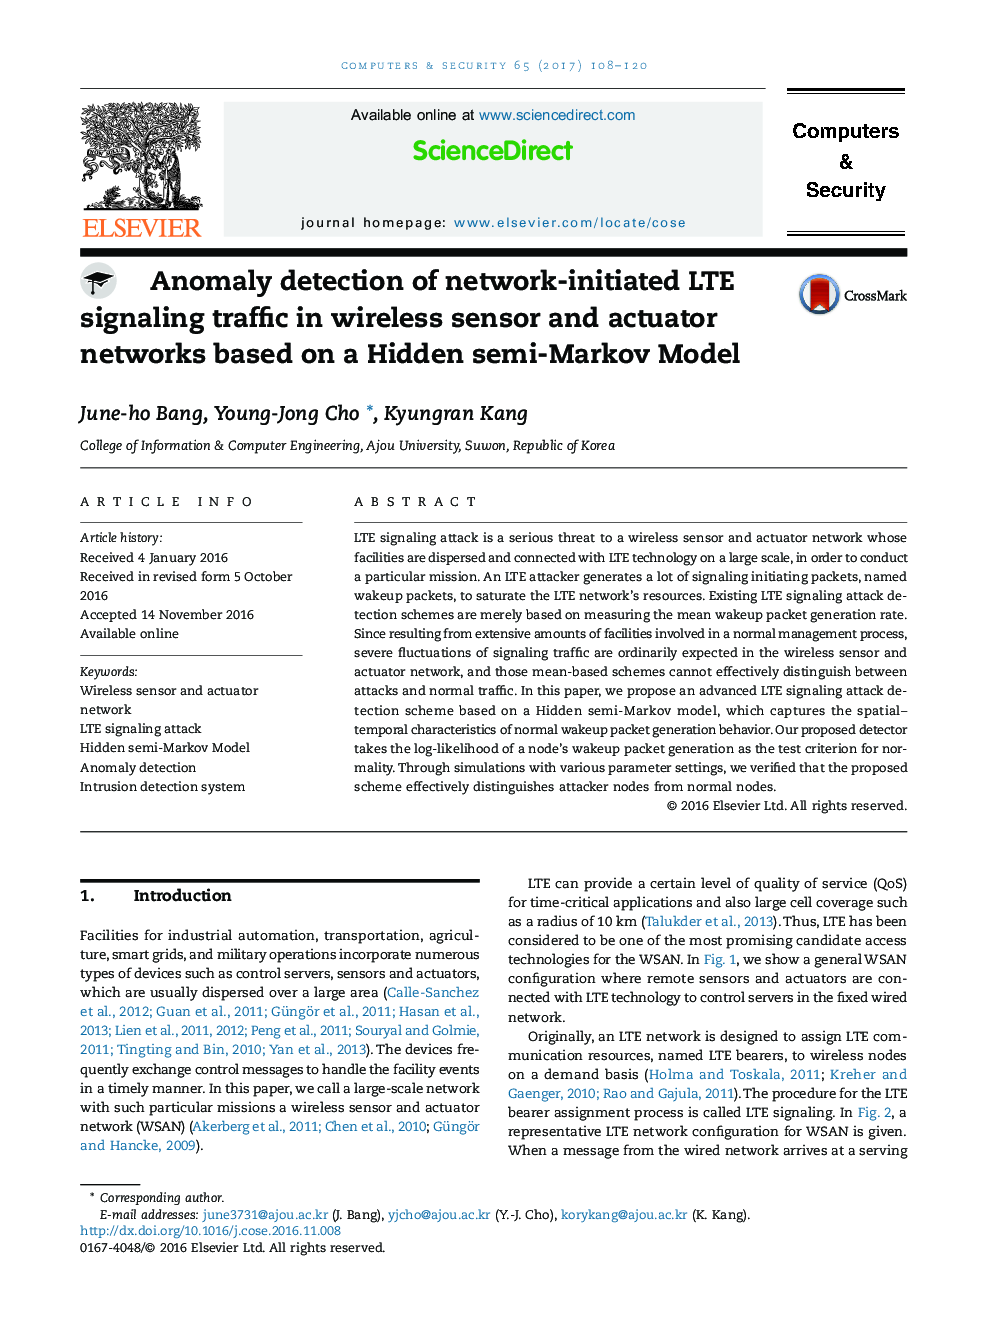 Anomaly detection of network-initiated LTE signaling traffic in wireless sensor and actuator networks based on a Hidden semi-Markov Model